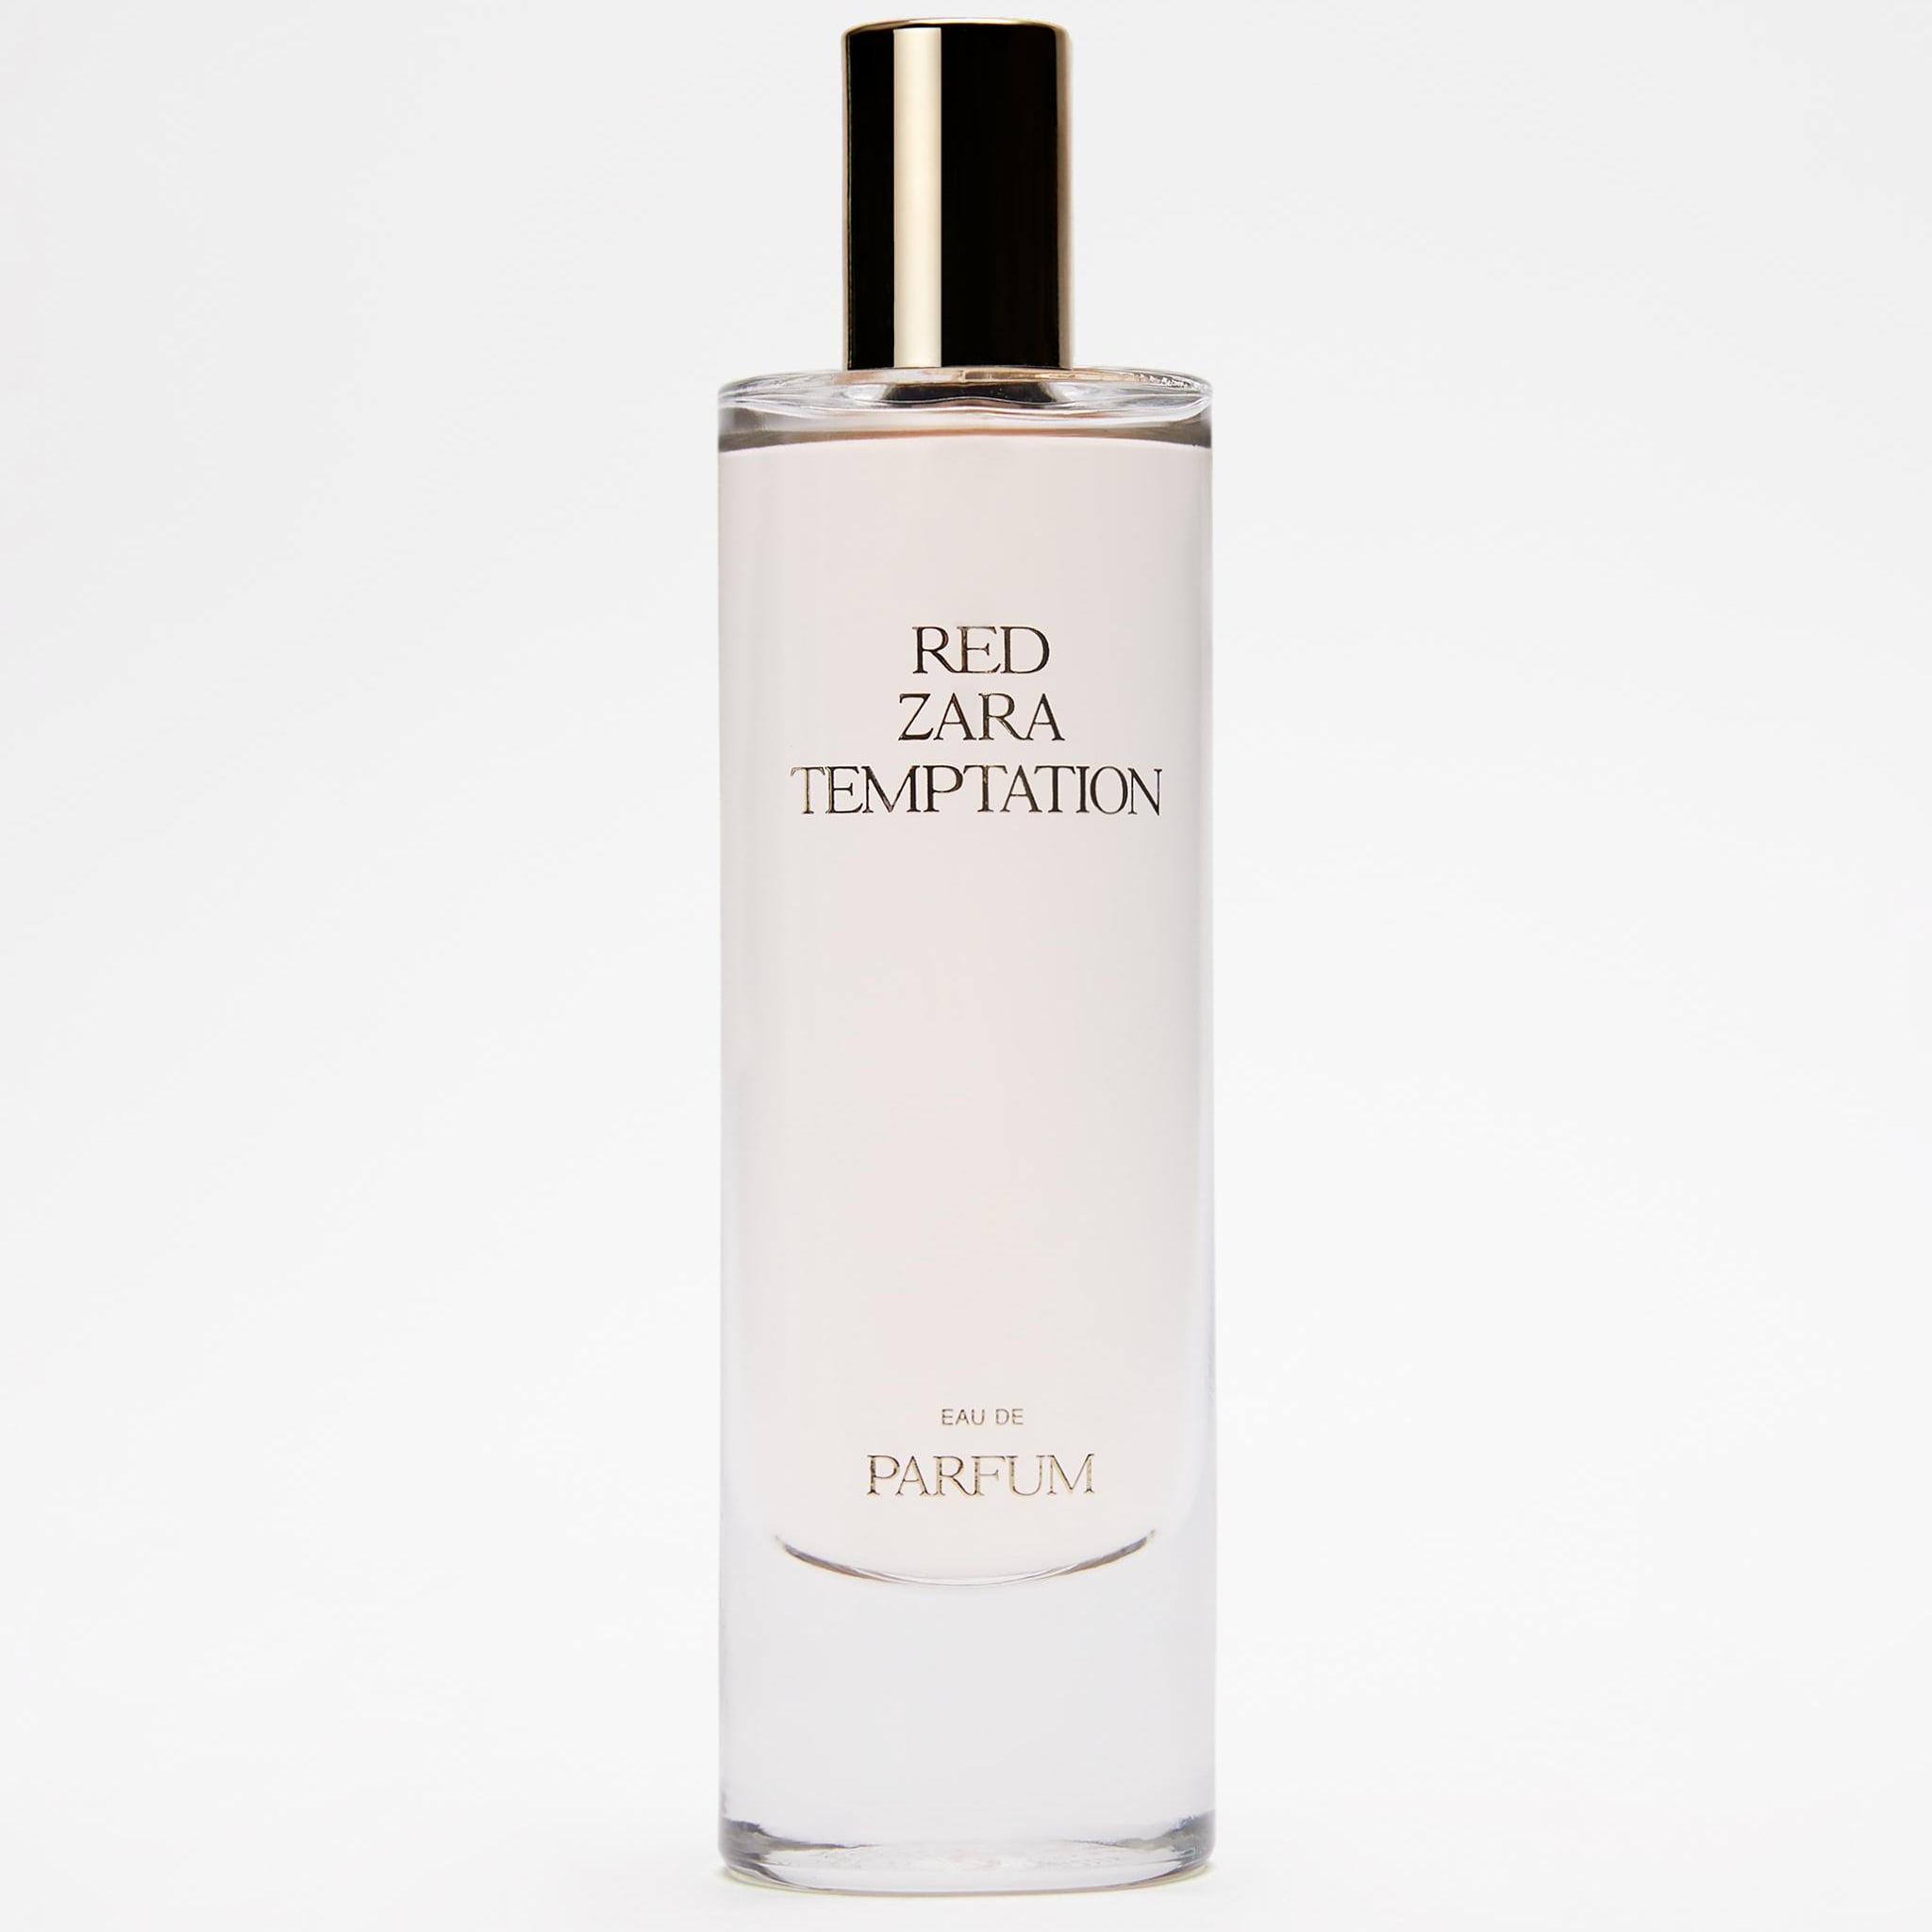 <p><a href="https://www.zara.com/us/en/red-temptation-80-ml-p20110242.html">BUY NOW</a></p><p>$36</p><p>Is there any better compliment than someone saving you smell good? Personally, we think it's the best possible comment to receive. This is exactly why we find ourselves frequently hitting the "add to cart" button whenever there's a <a href="https://www.popsugar.com/beauty/best-perfumes-48761428" class="ga-track">new perfume</a> on our radar. However, we're the first to admit that a <a href="https://www.popsugar.com/beauty/best-hair-perfumes-49339404" class="ga-track">fragrance obsession</a> can become quite costly, especially if you like to <a href="https://www.popsugar.com/beauty/How-Layer-Perfumes-38197985" class="ga-track">layer scents</a> or also experiment with <a href="https://www.popsugar.com/beauty/best-hair-perfumes-49339404" class="ga-track">hair perfumes</a>. Fortunately, there are plenty of affordable options on the market, like Zara's perfume line. </p> <p>Not only are all of the brand's options budget-friendly but there are a few that are continuously going viral online because shoppers can't get enough of how good they are. There are woody blends, fruity picks, and light scents that are perfect for anyone, as well as heavier perfumes that are extremely long-lasting. </p> <p>Whether you're looking for a Zara fragrance you can wear every day or a scent that's perfect for a special occasion - like a friend's birthday or a summertime wedding - we've got you covered. Ahead, we rounded up the best Zara perfumes, and we even matched you to the best option based on other popular scents. Feel free to take your pick, ahead.</p>